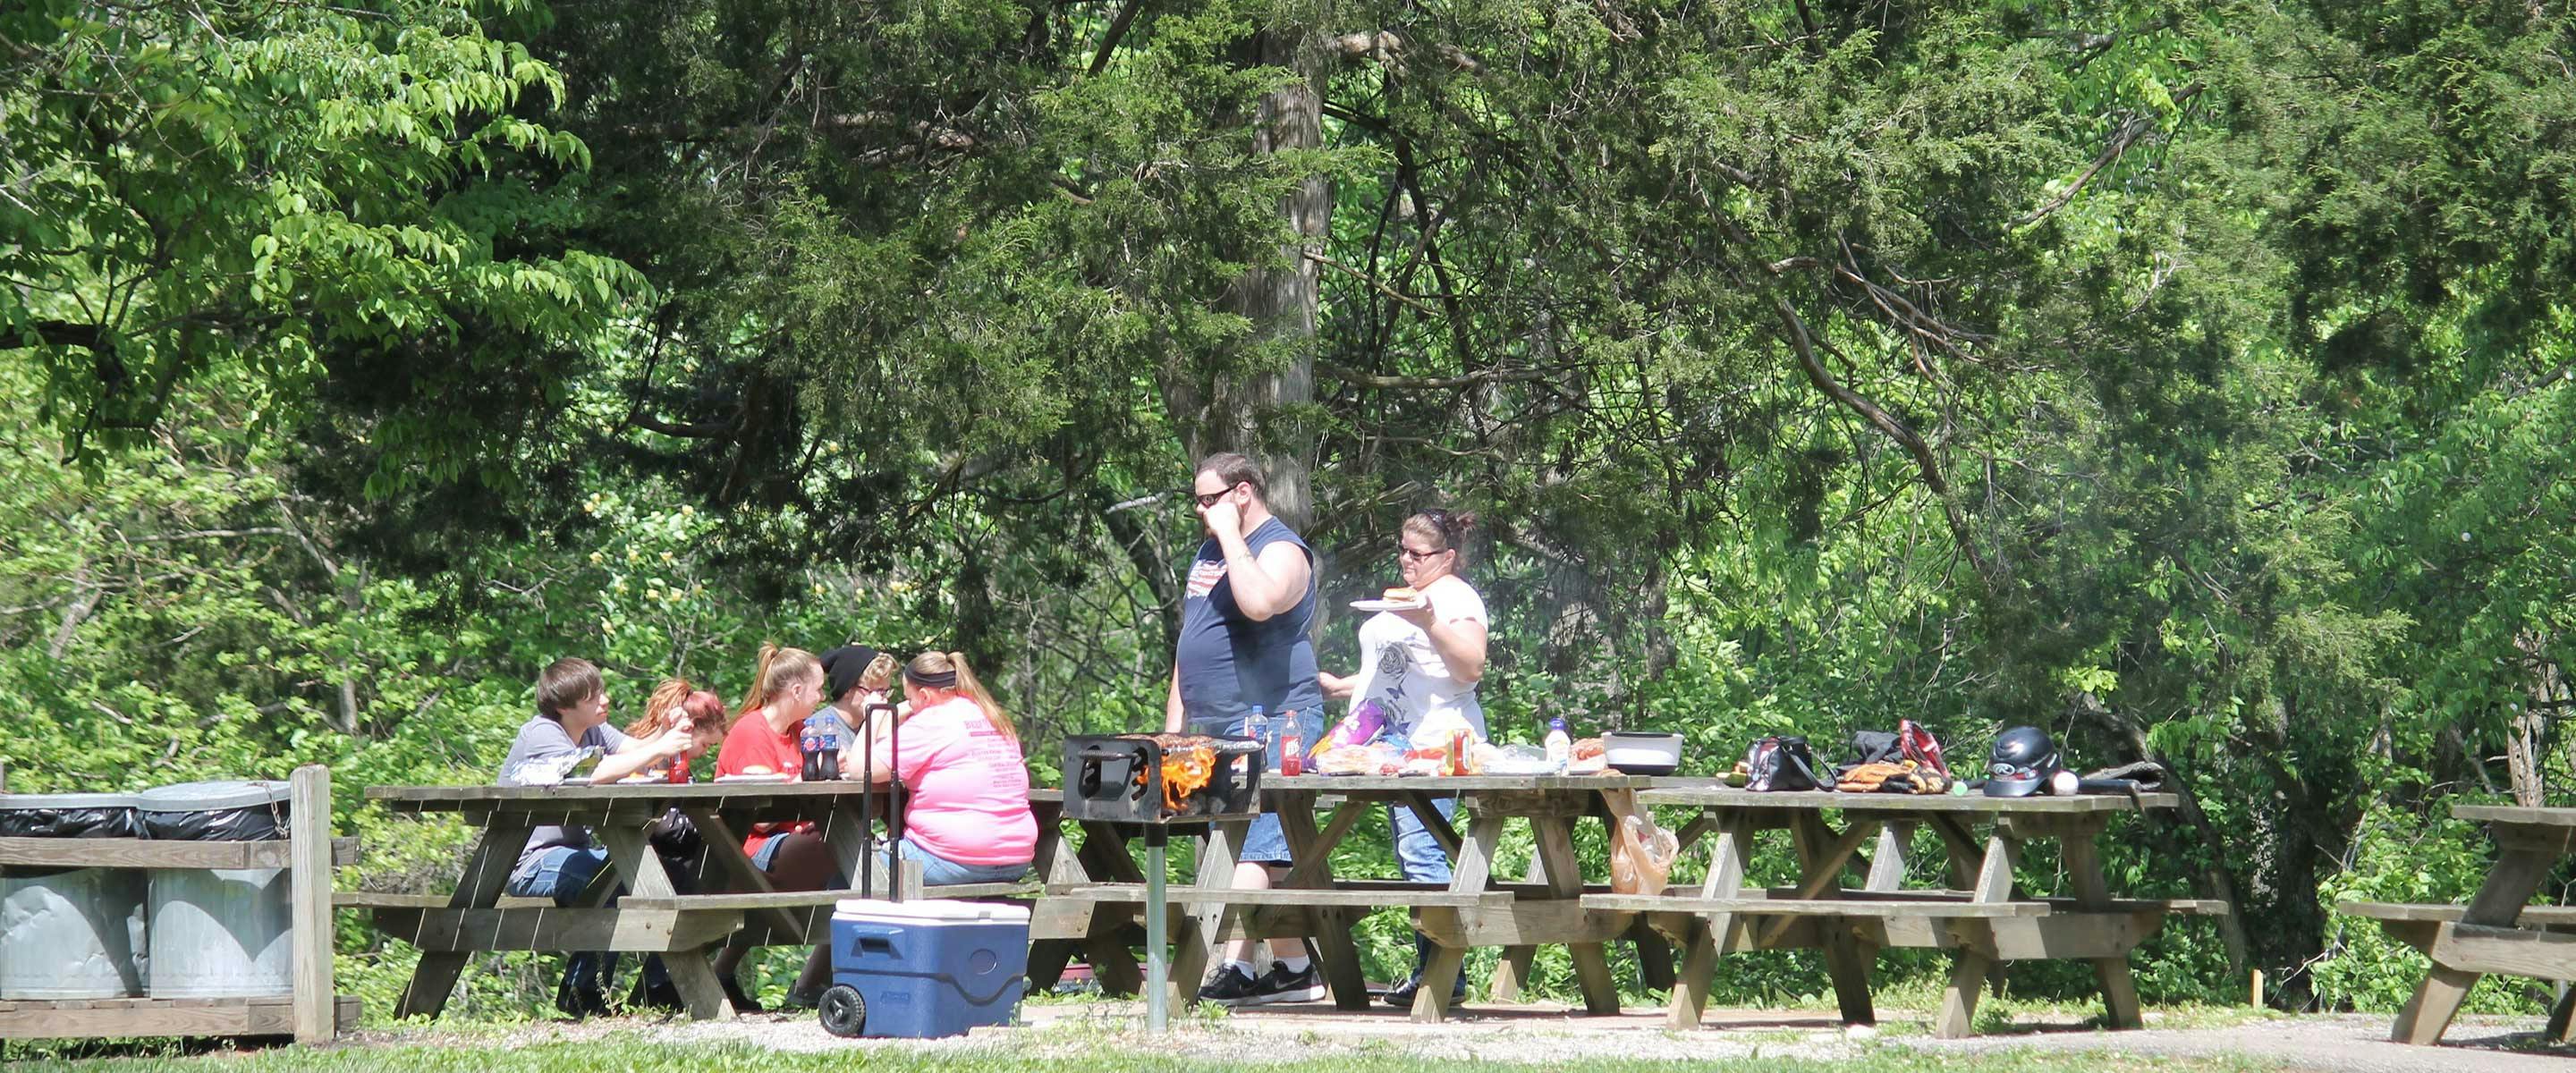 Couple enjoying a grilled meal at one of the picnic tables